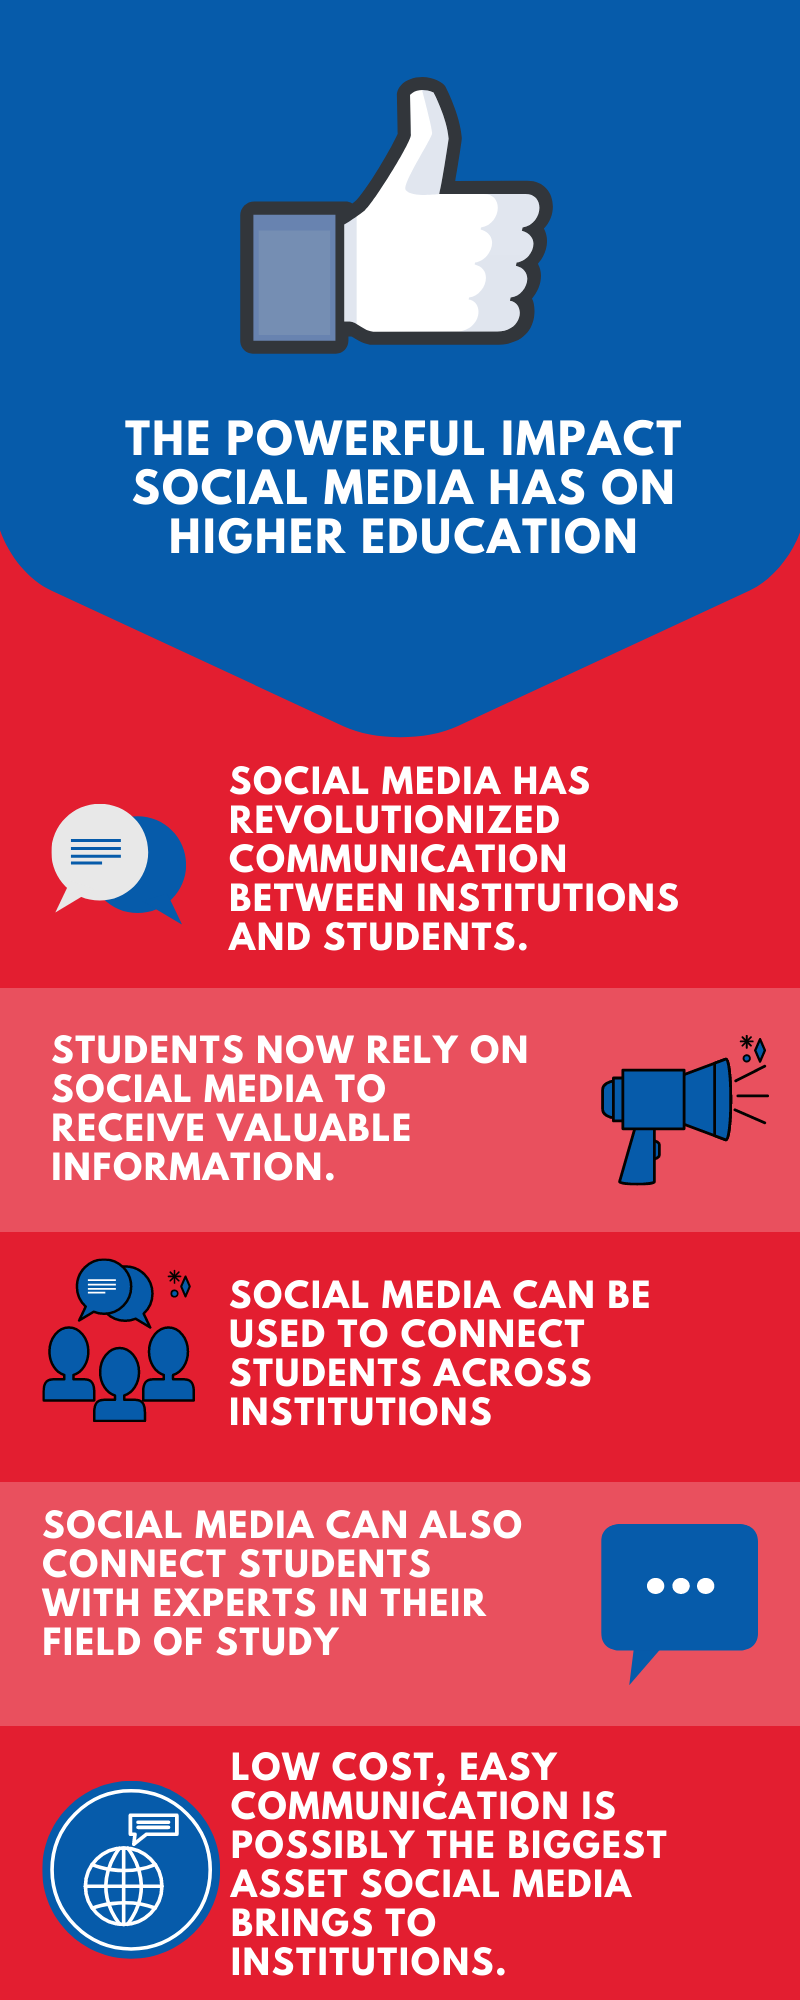 Benefits of social media for students